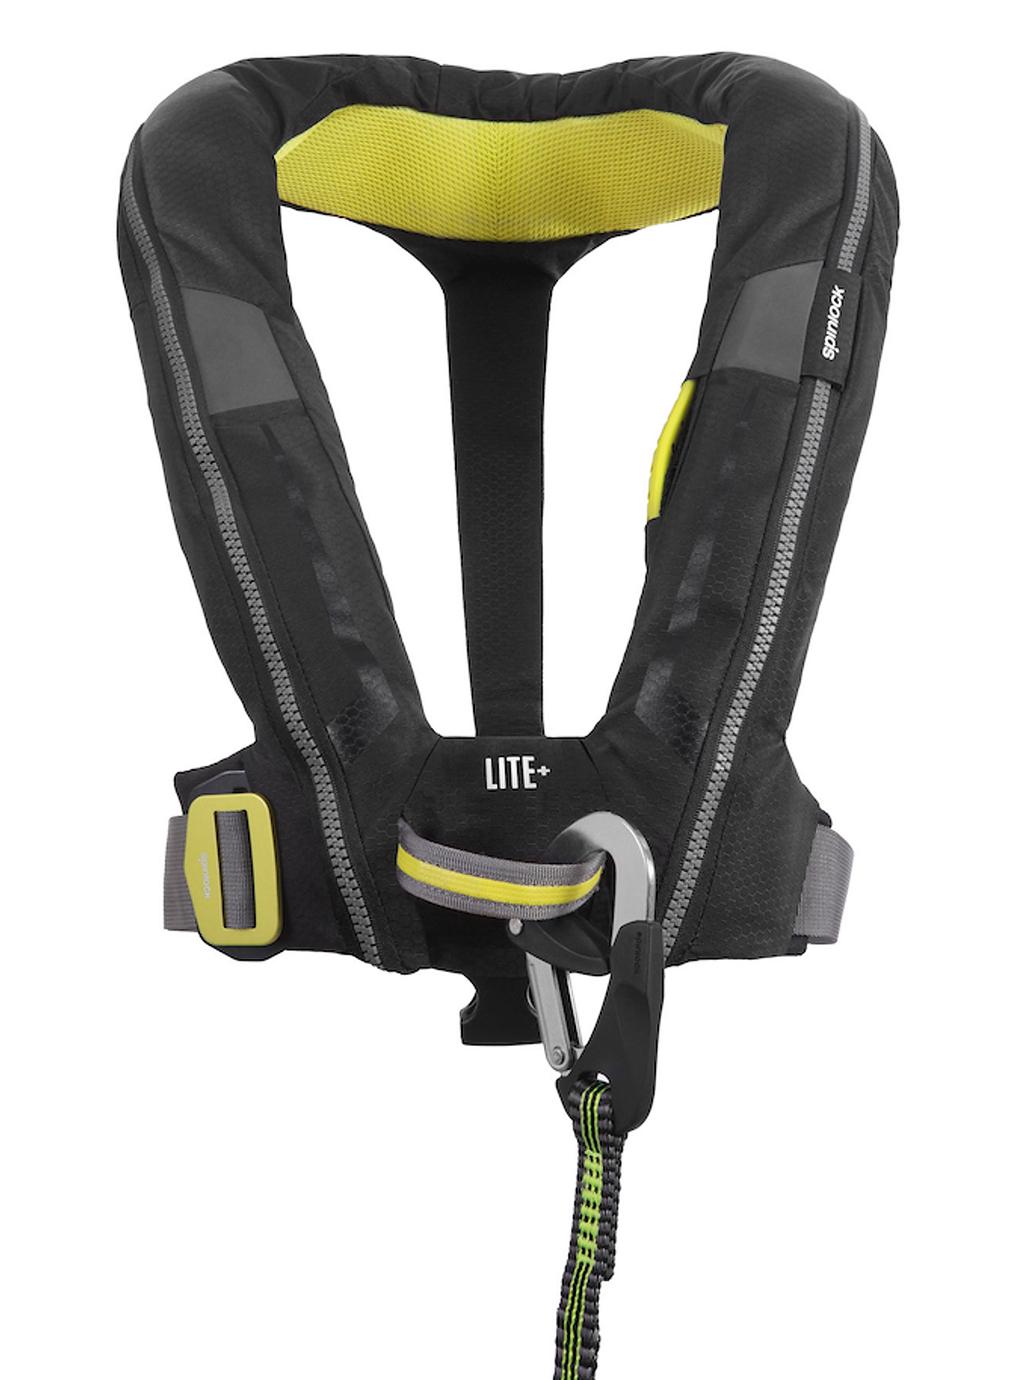 Spinlock LTE+ now with safety harness © Spinlock